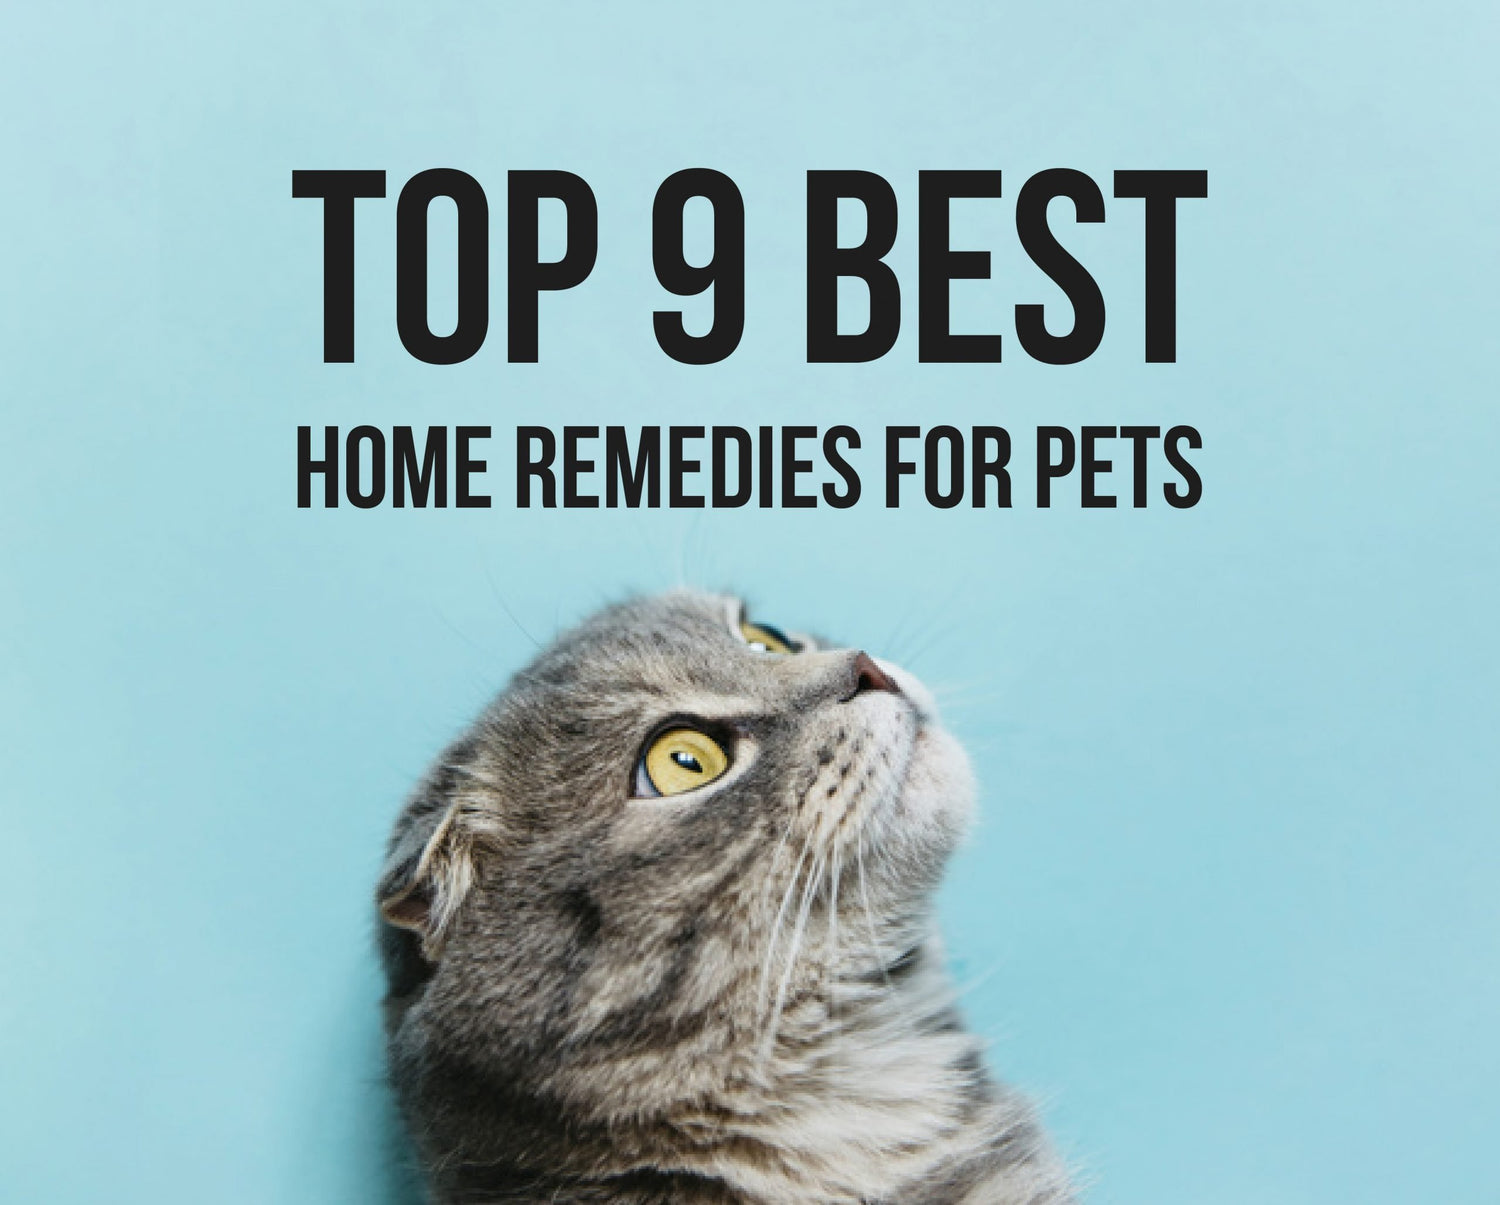 Top 9 Best Home Remedies for Pets